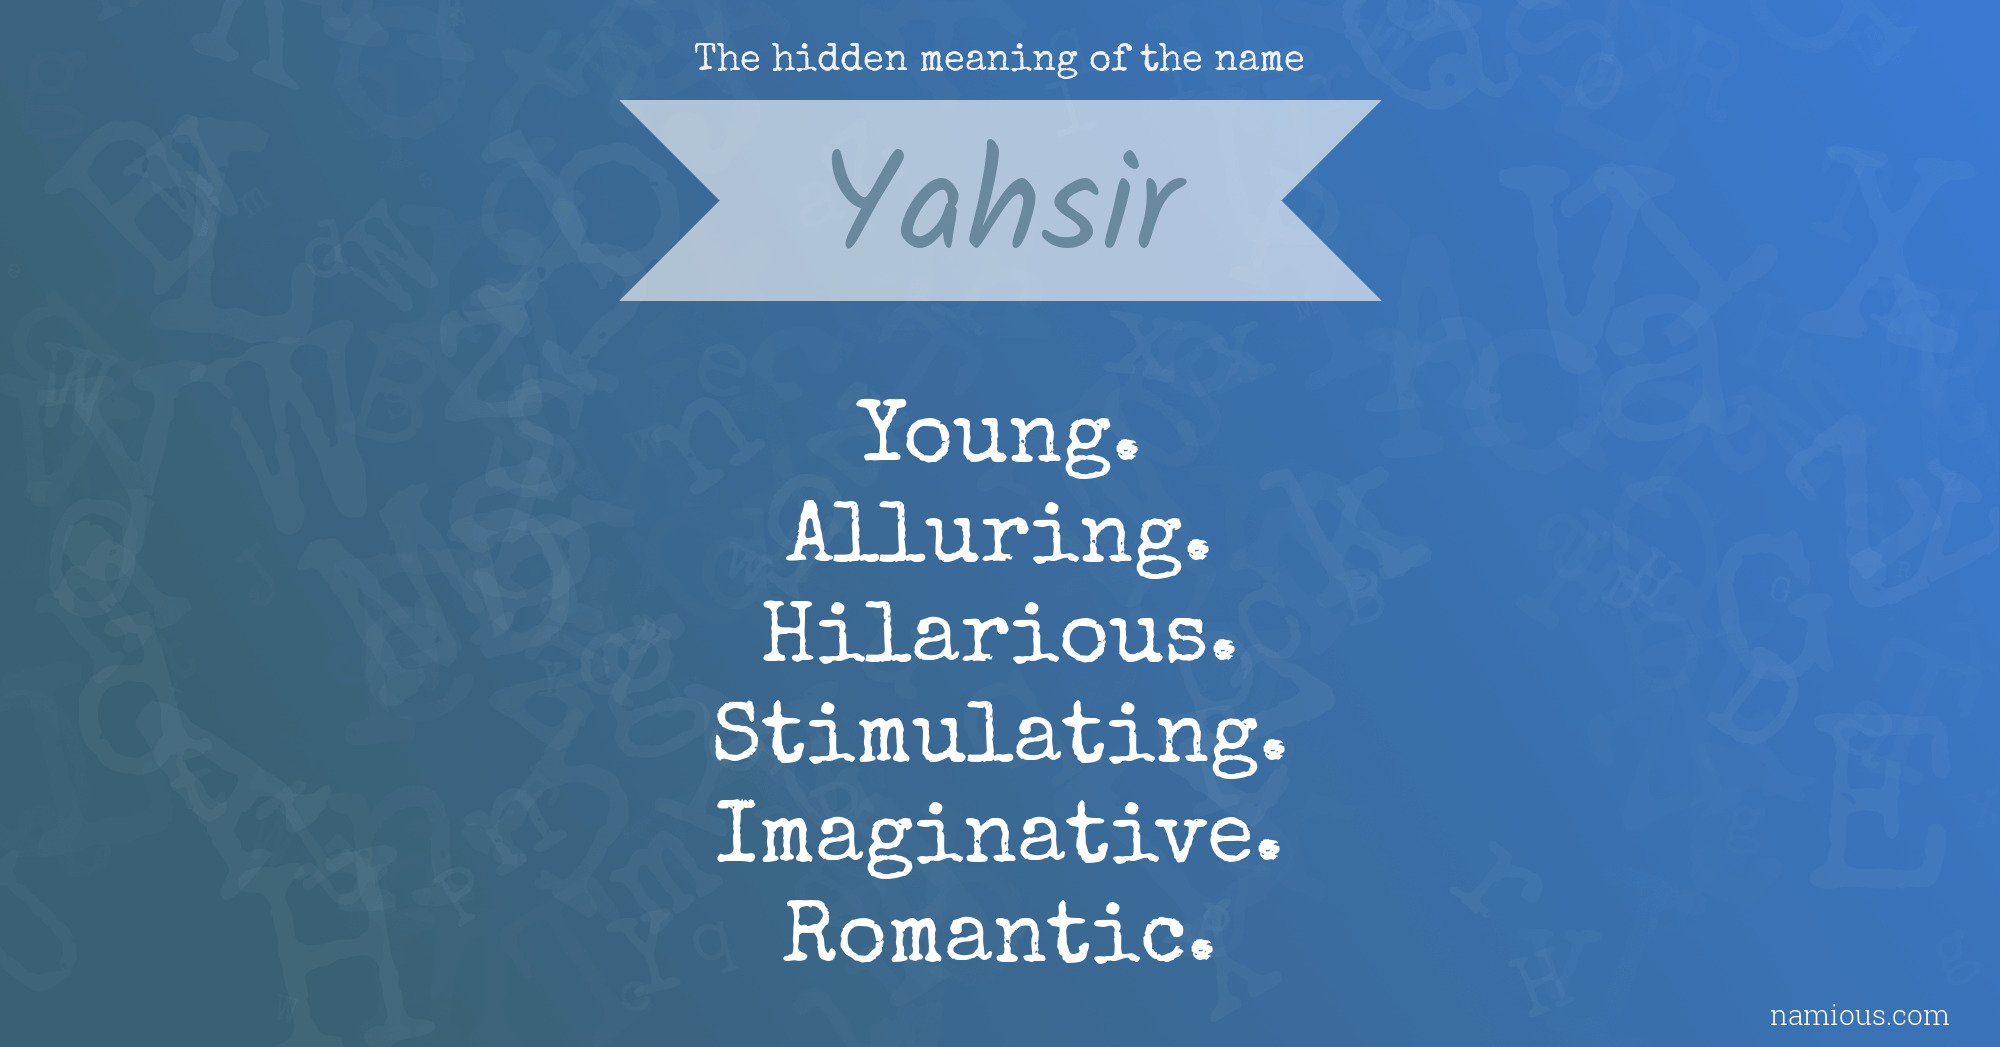 The hidden meaning of the name Yahsir